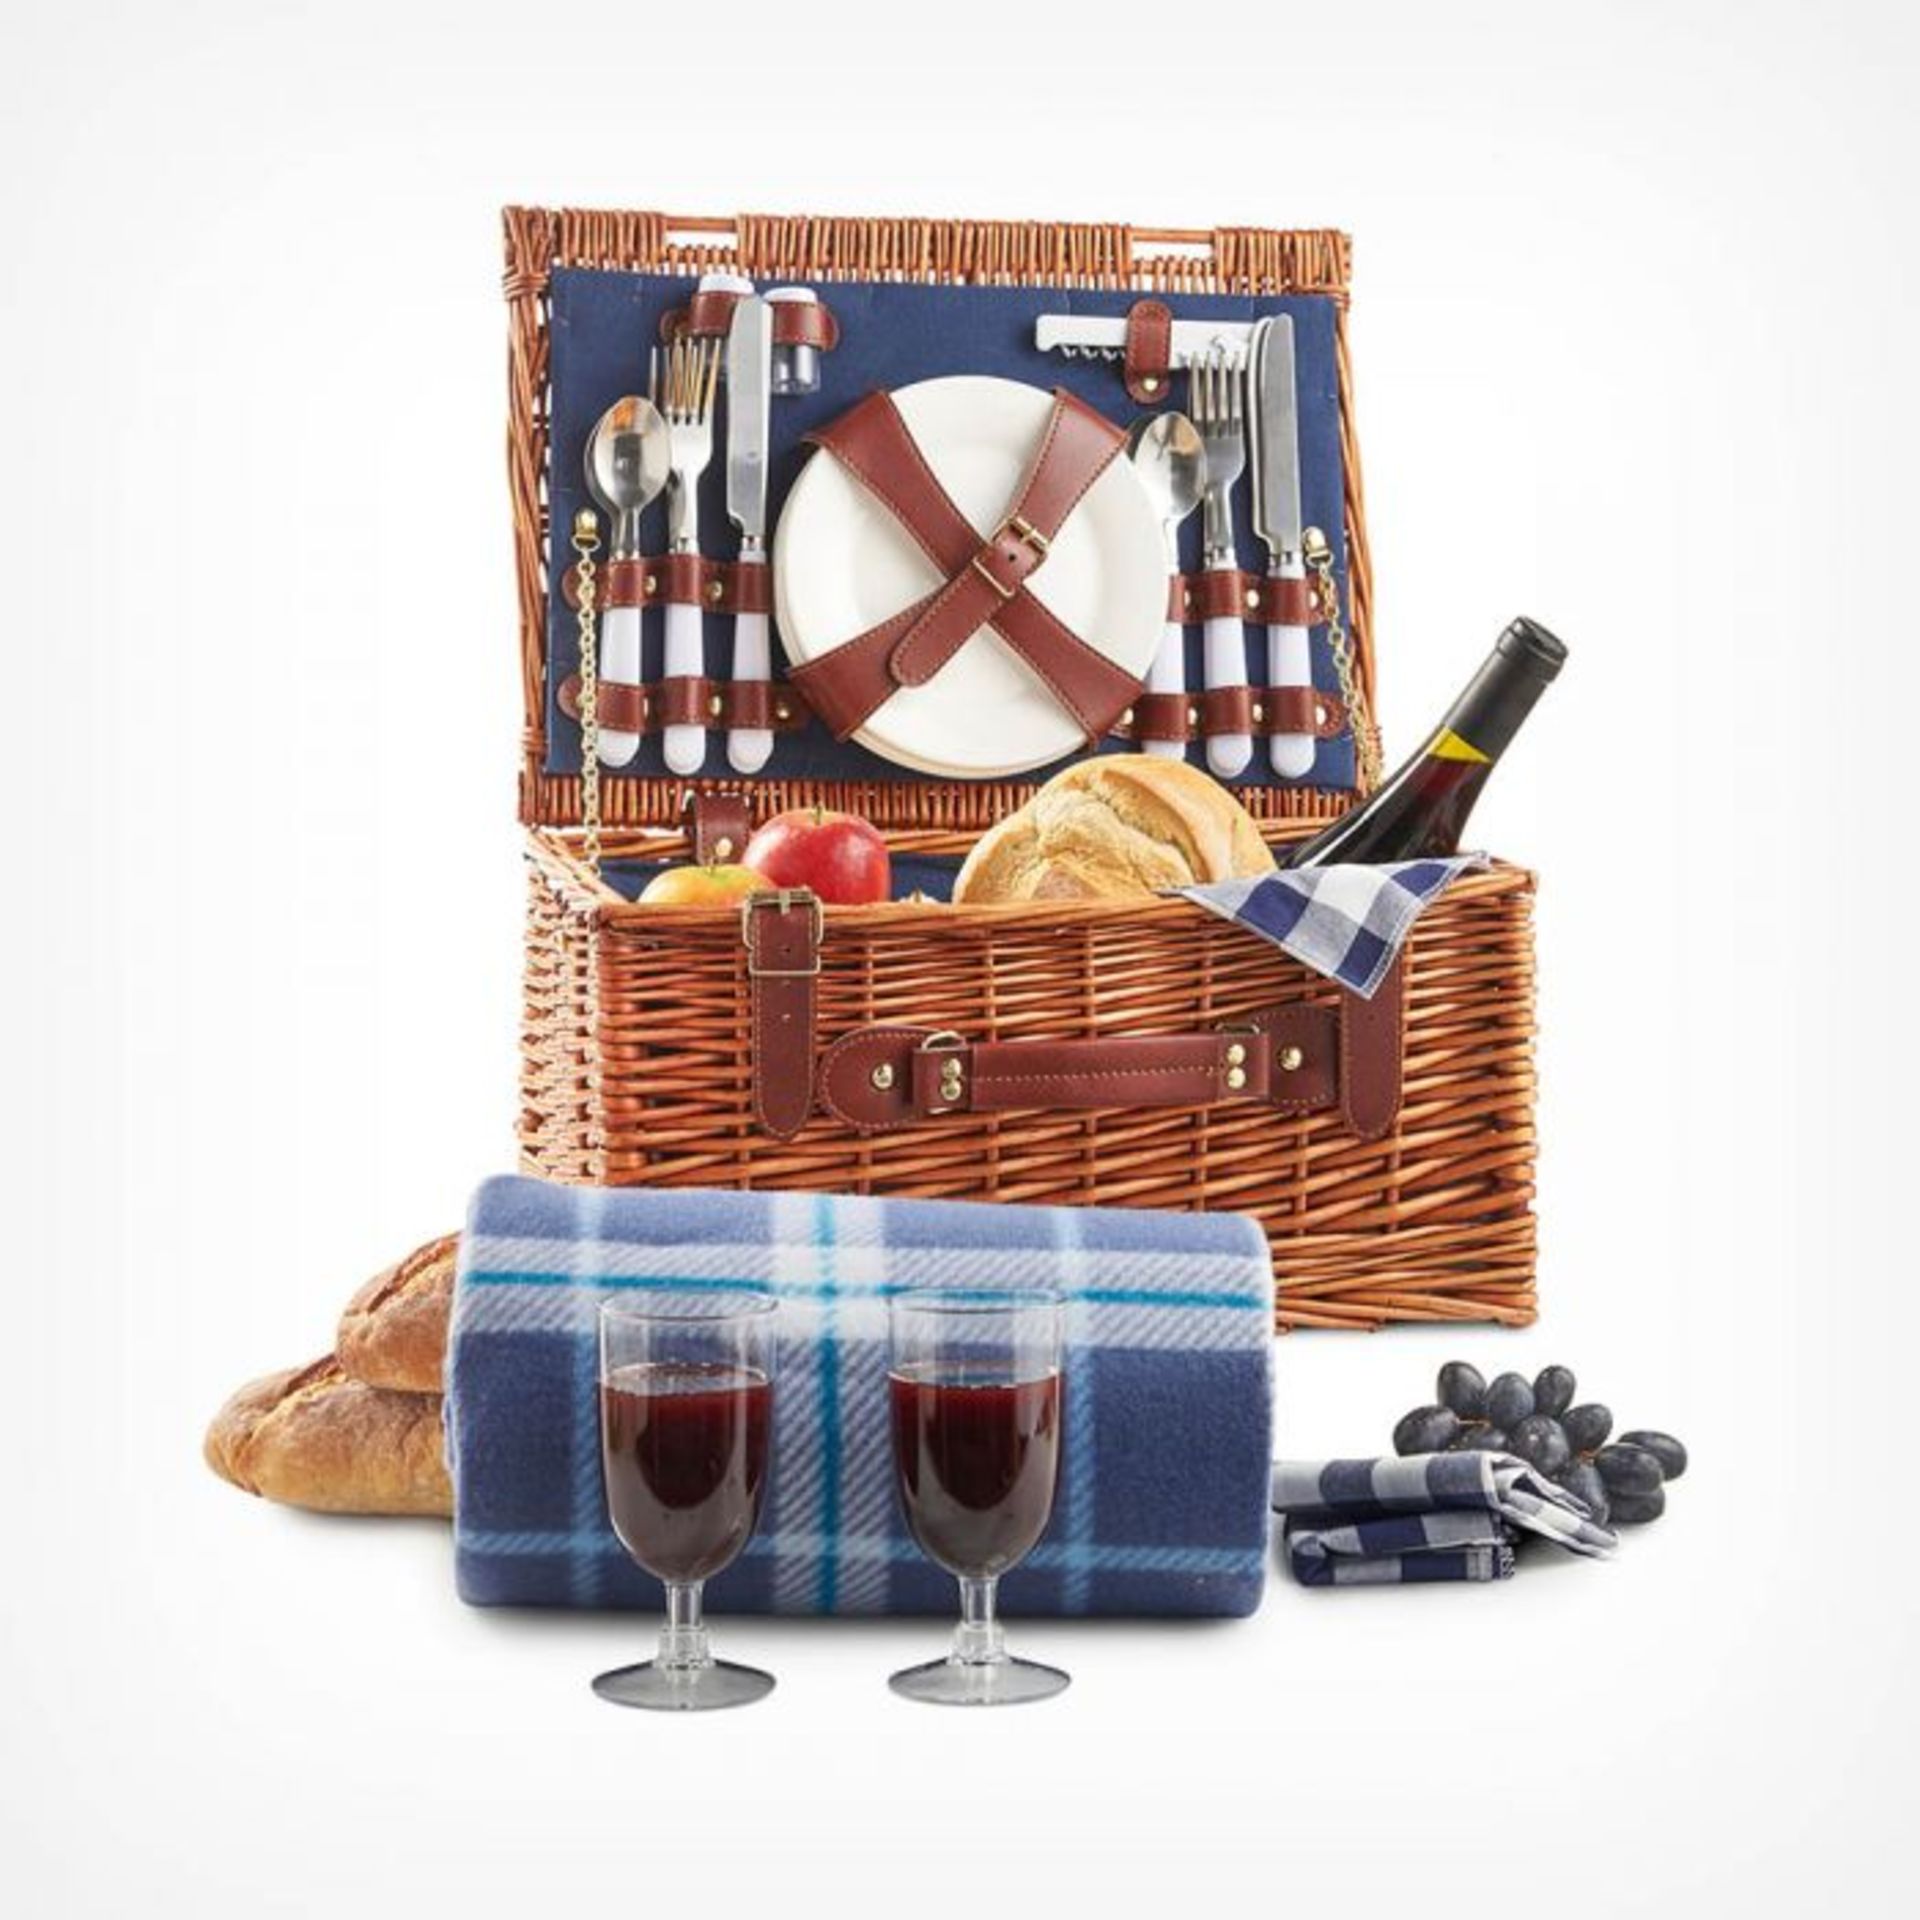 2 Person Navy Wicker Picnic Basket. Make the most of dining in the sun with our 2 Person Navy Wicker